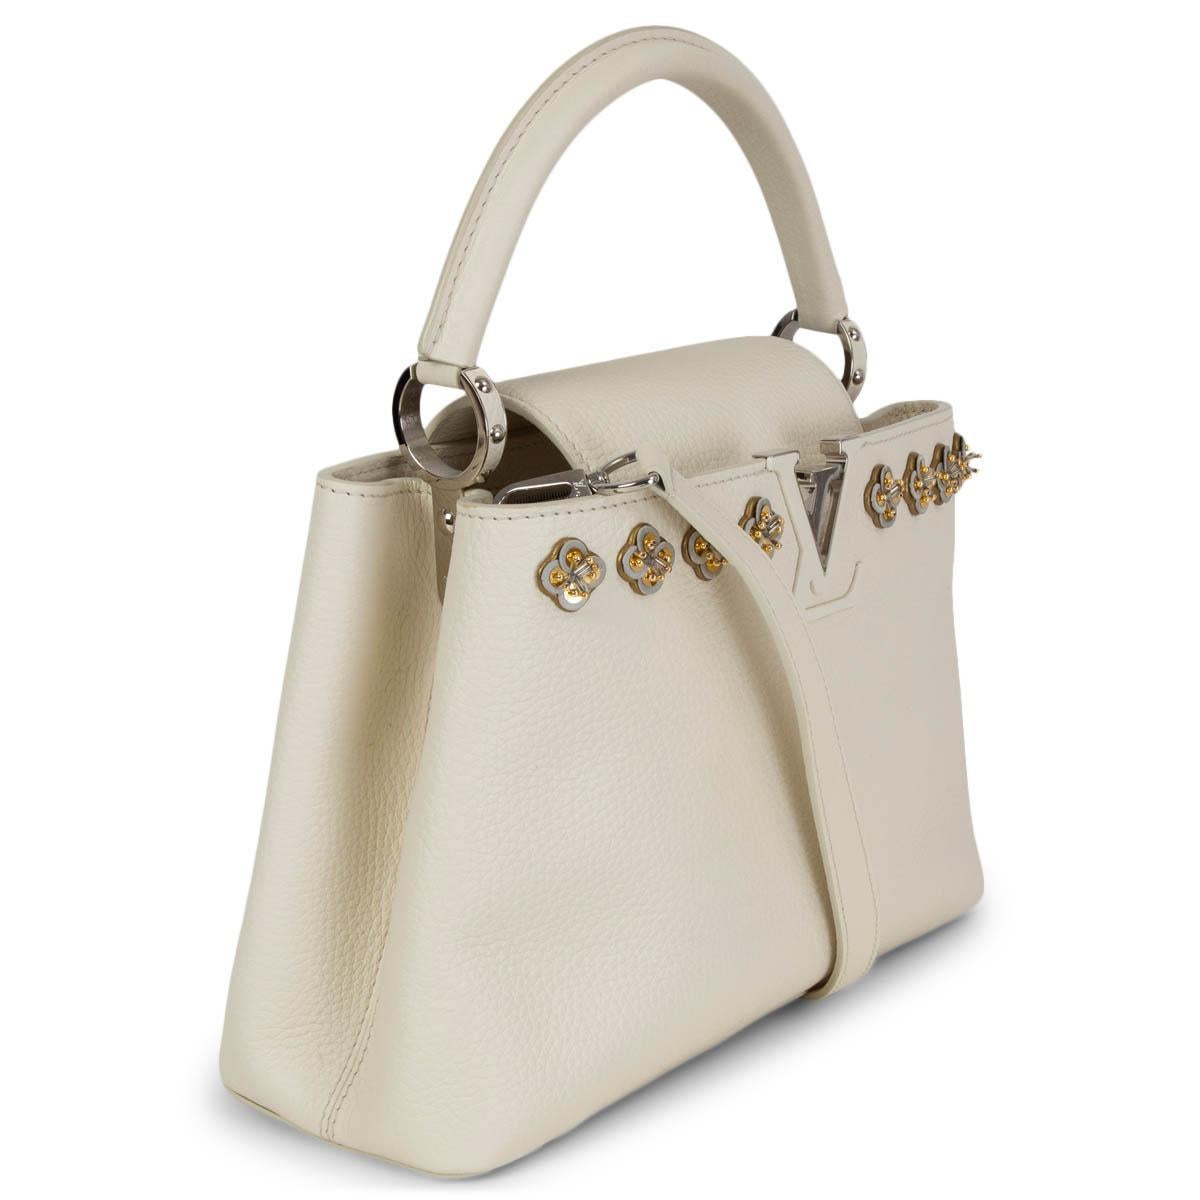 100% authentic Louis Vuitton Capucines 2018 Limited Edition PM Hanami Applique handbag in blanc (off-white) grained calfskin featuring silver-tone hardware. Opens with a flap on top and the interior is devided in two departments. Lined in white